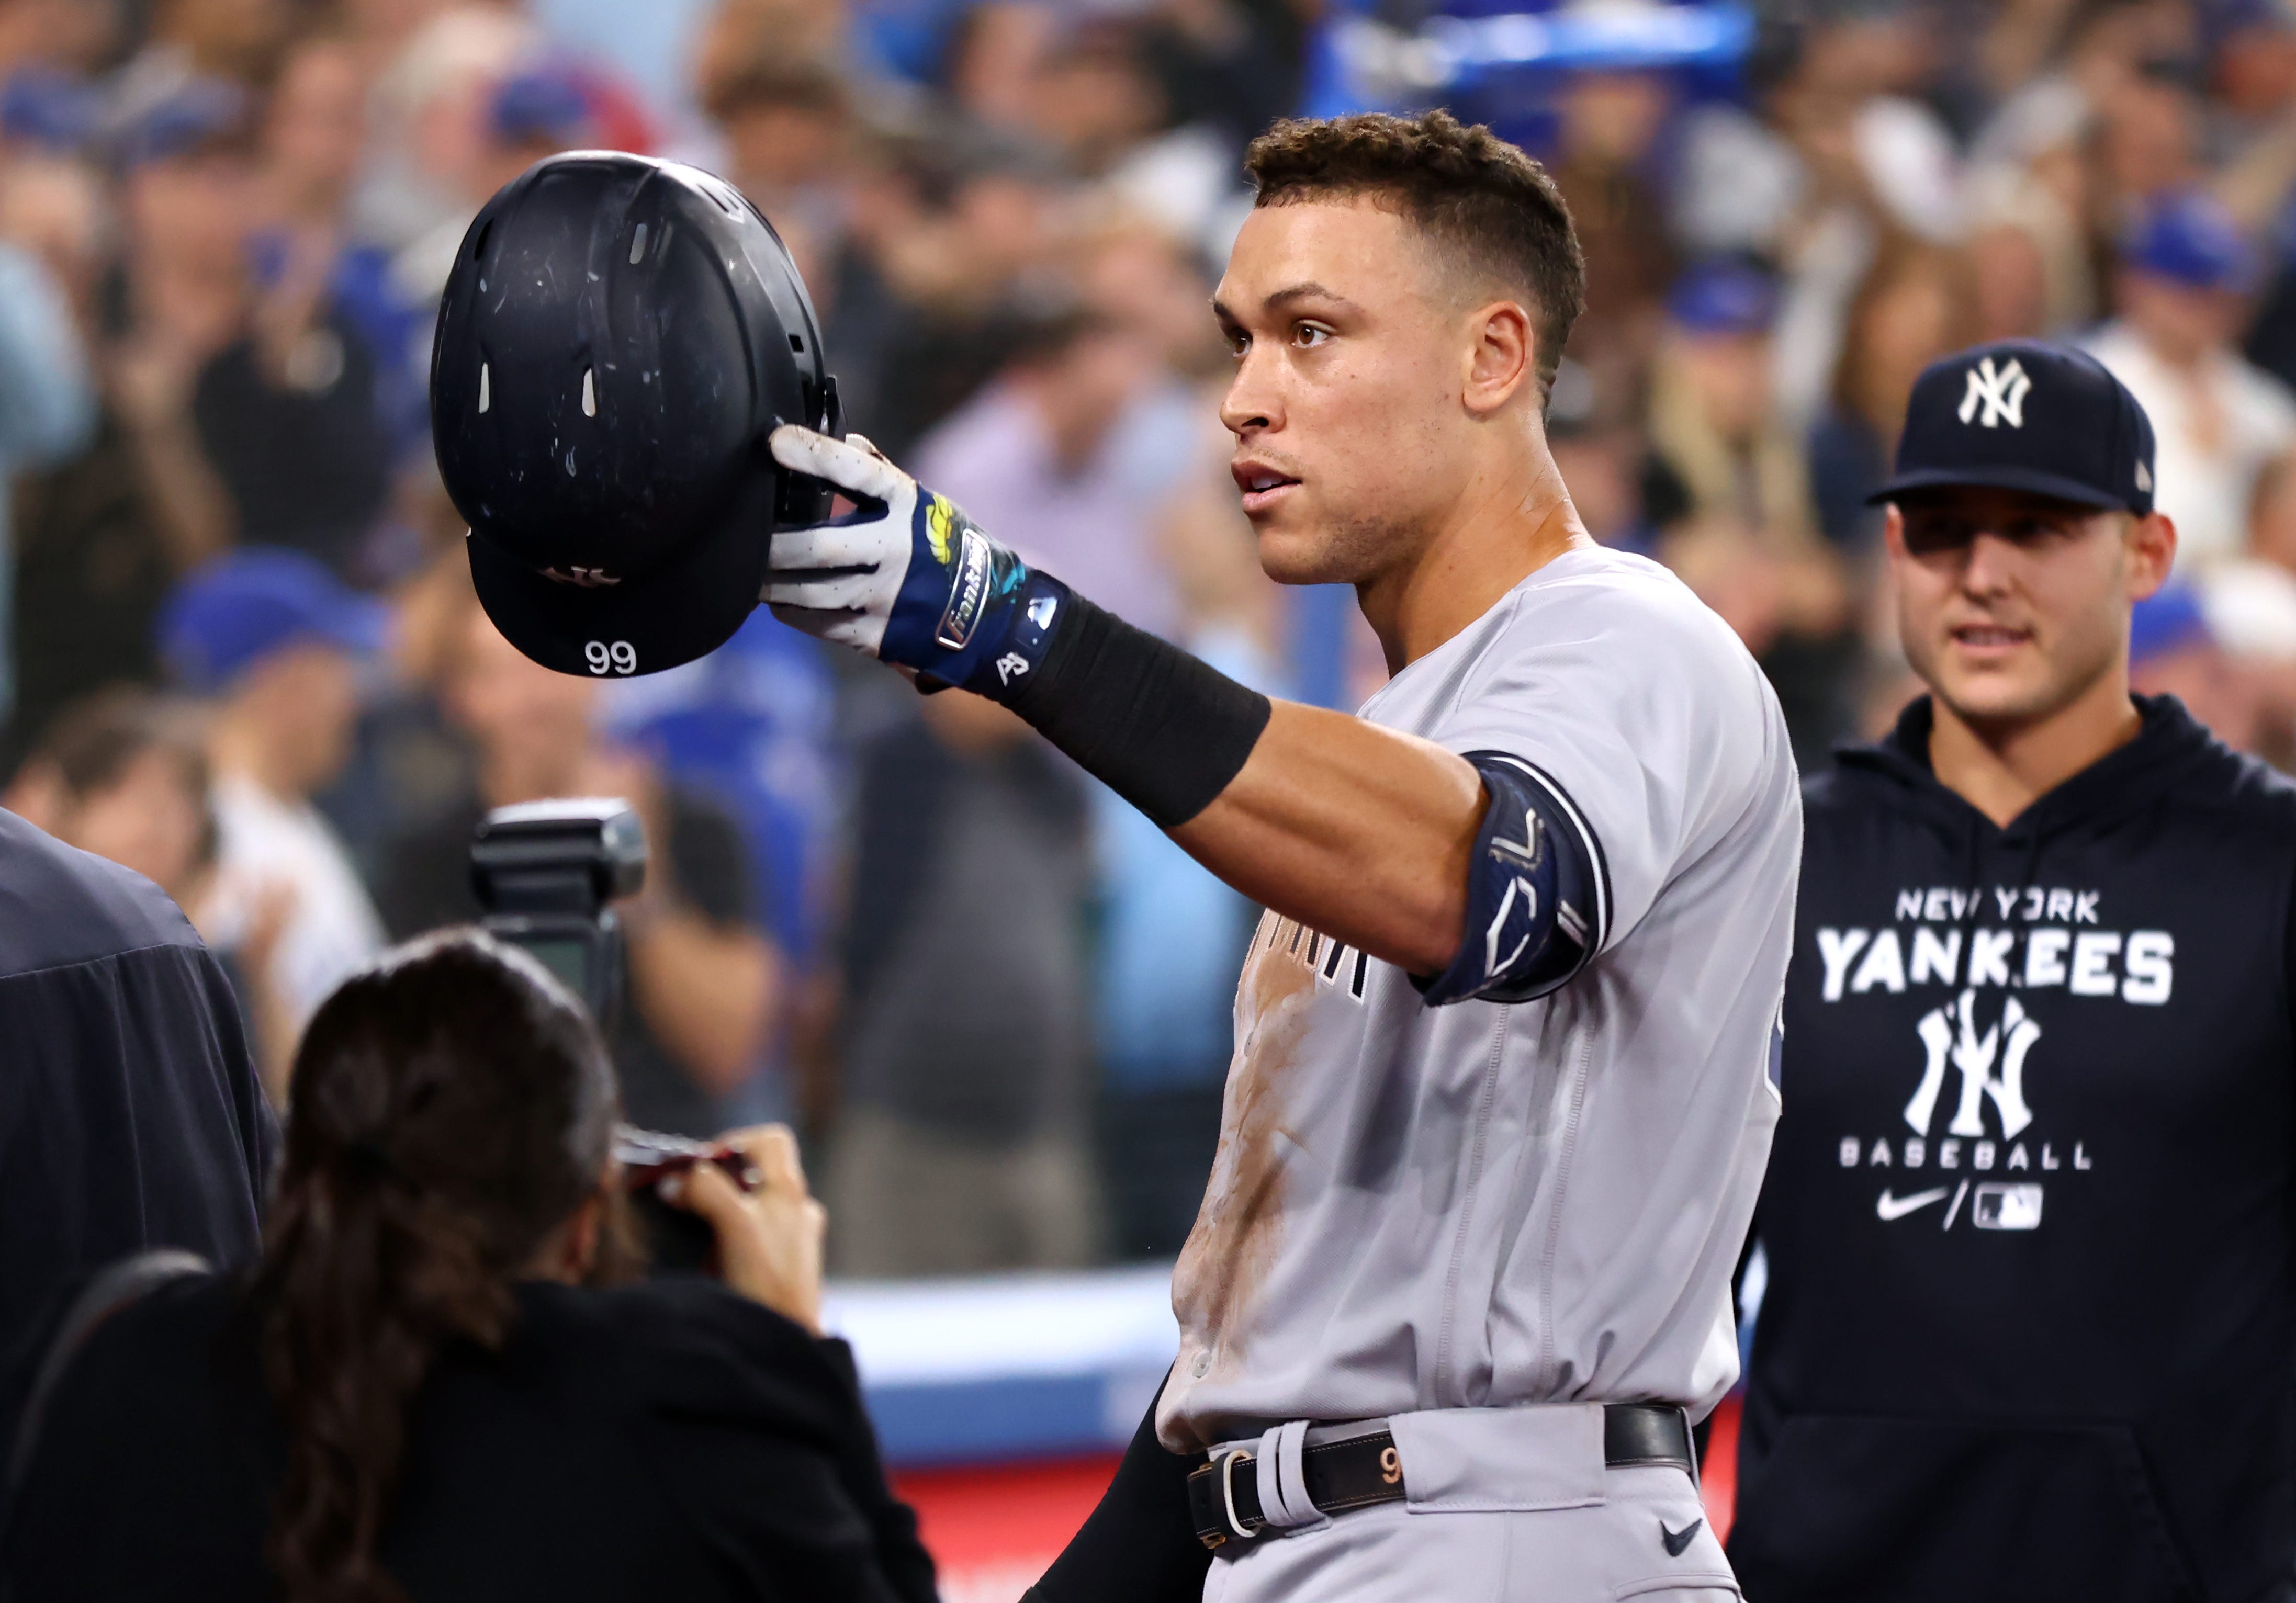 Aaron Judge 2022 Tribute All Rise 